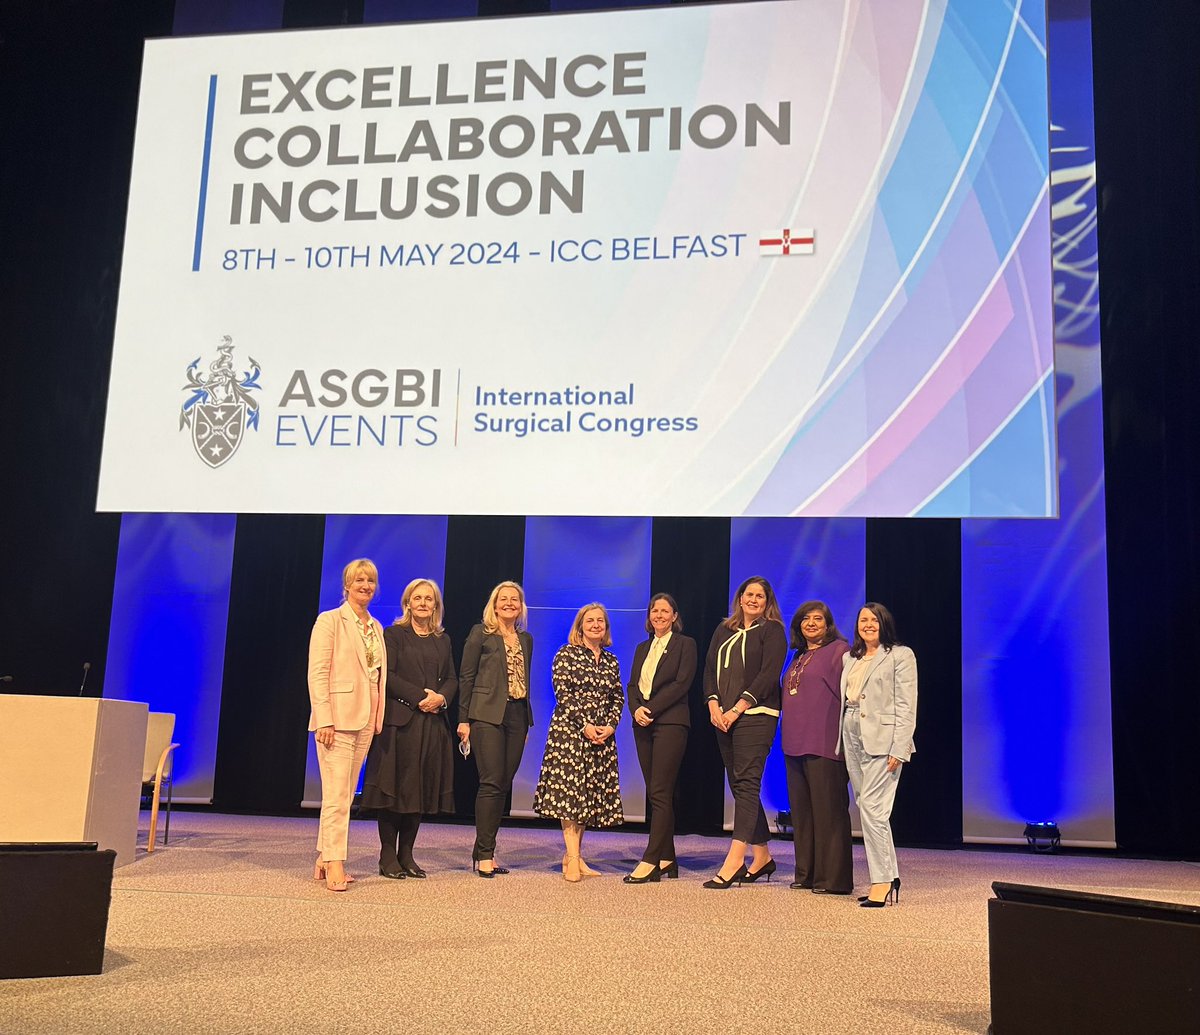 A powerhouse of inspirational female leadership sharing the stage today at #ASGBI2023 #Excellence #Collaboration #inclusion